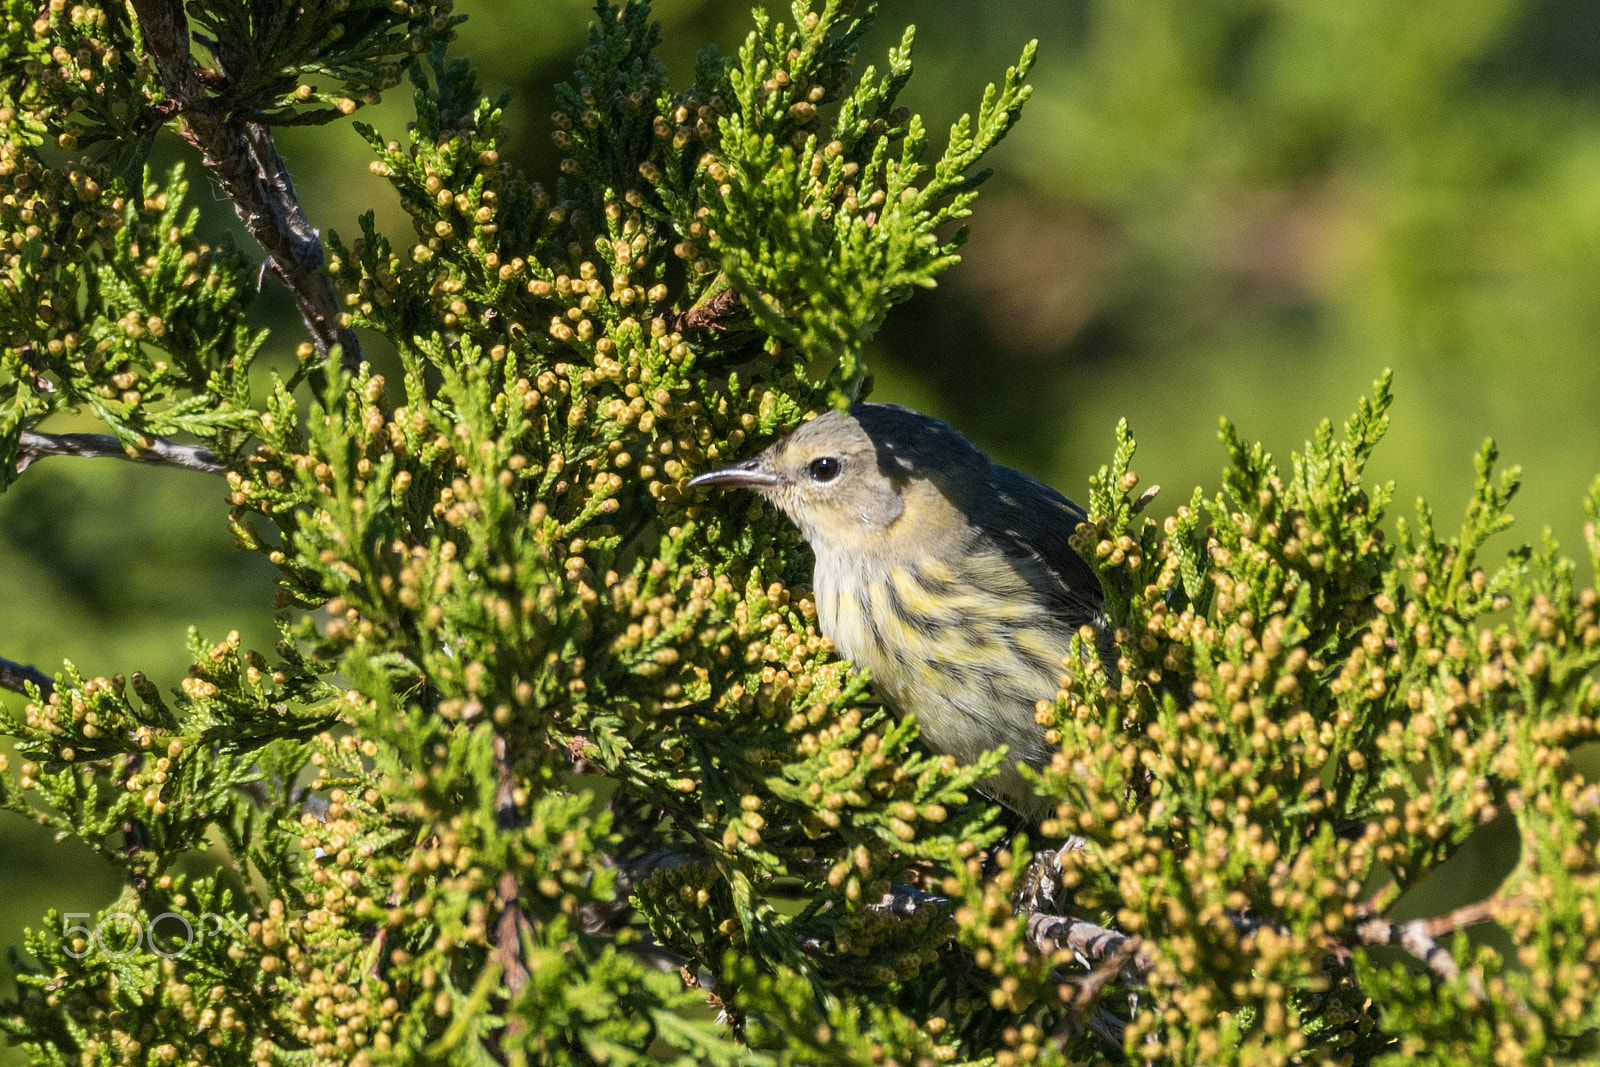 Nikon D5500 + Sigma 150-600mm F5-6.3 DG OS HSM | C sample photo. Cape may warbler (female) photography